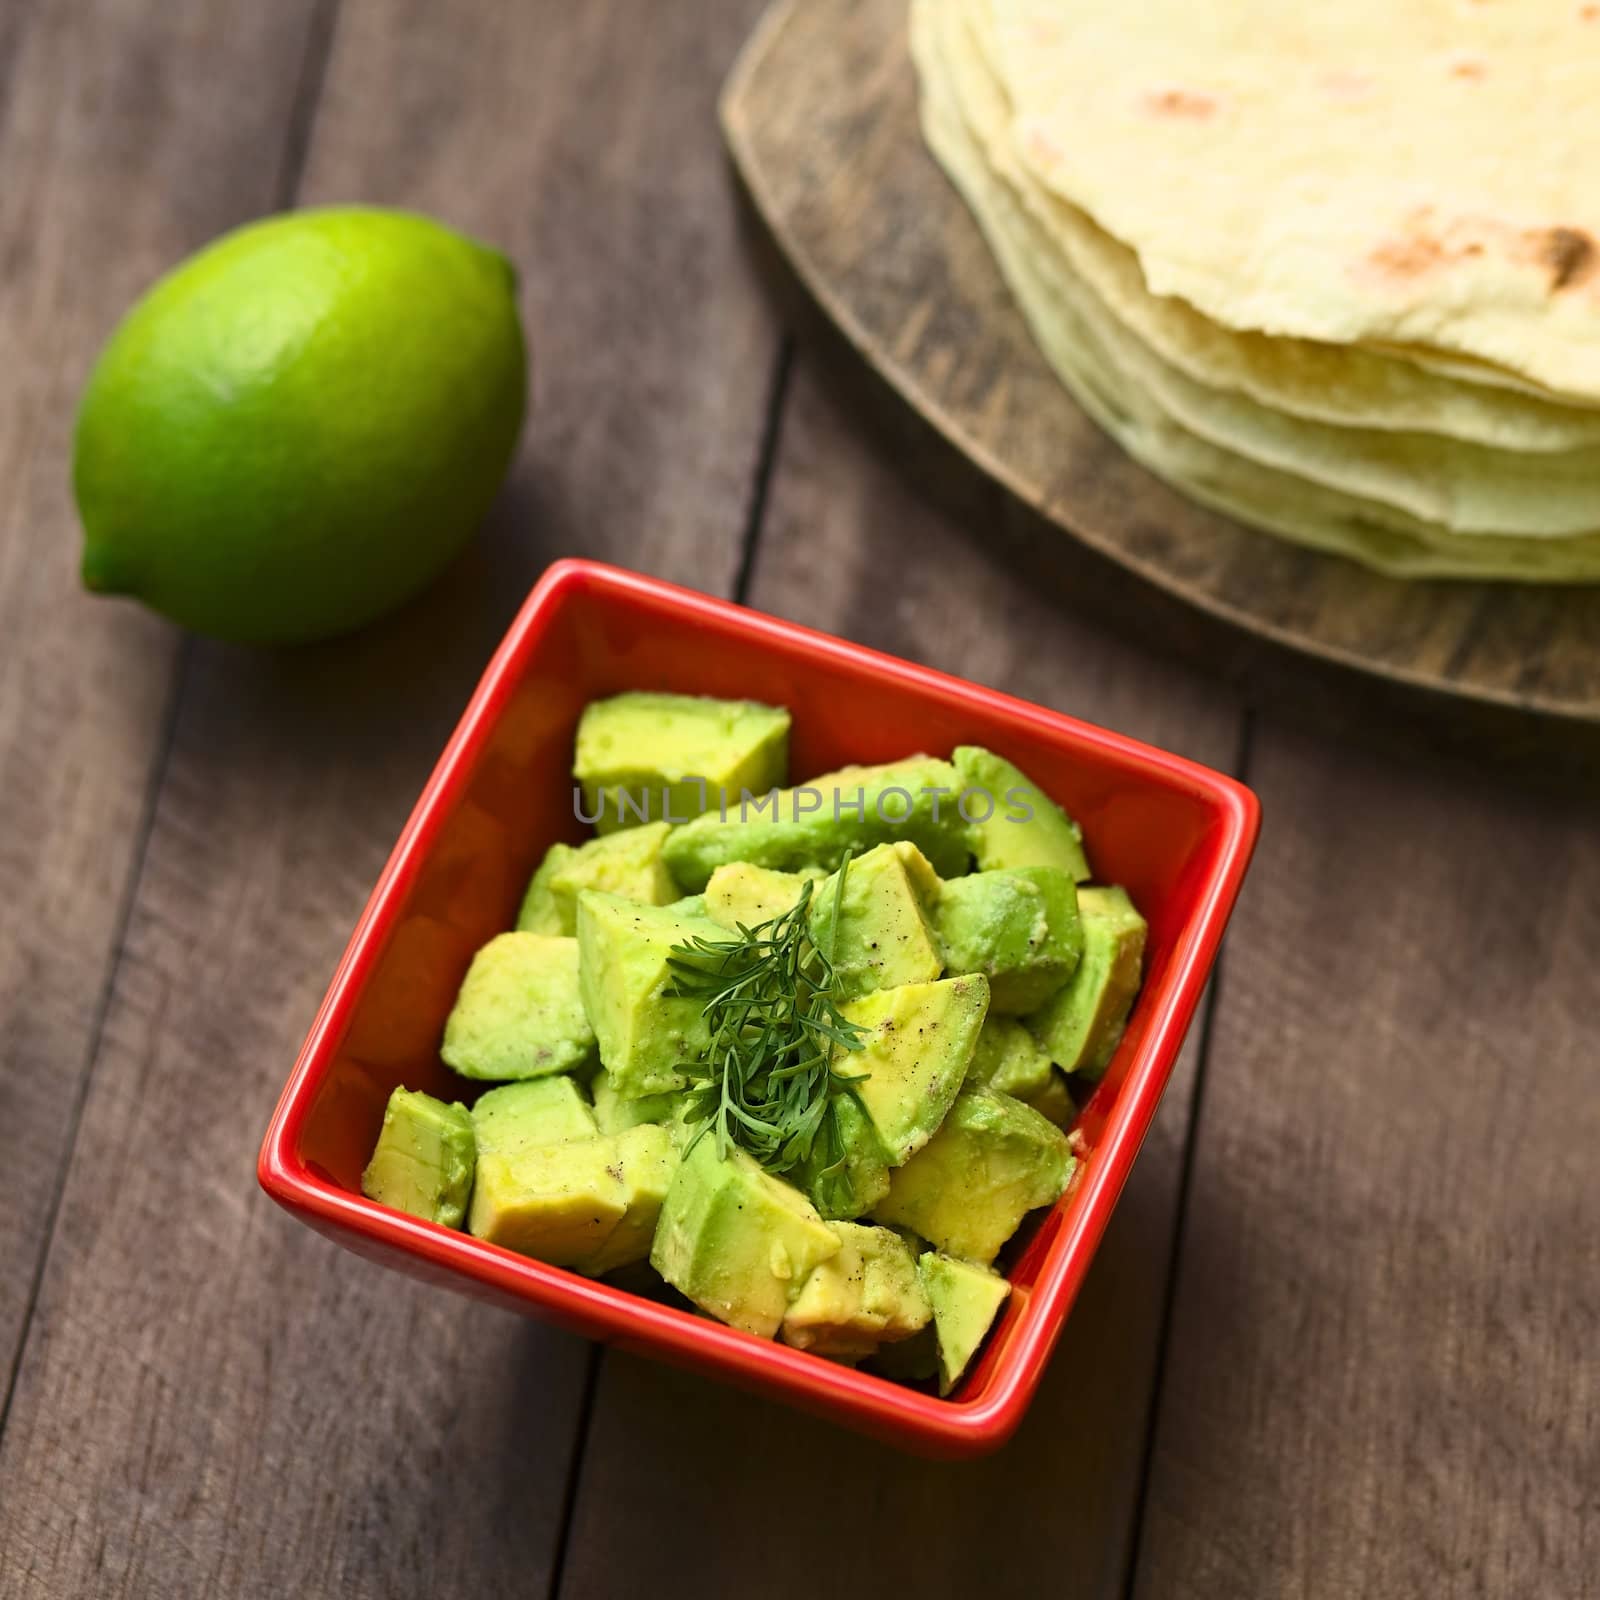 Fresh avocado salad prepared with lime juice, pepper, salt and garnished with fresh coriander leaves, homemade tortillas in the back (Selective Focus, Focus in the middle of the salad)  